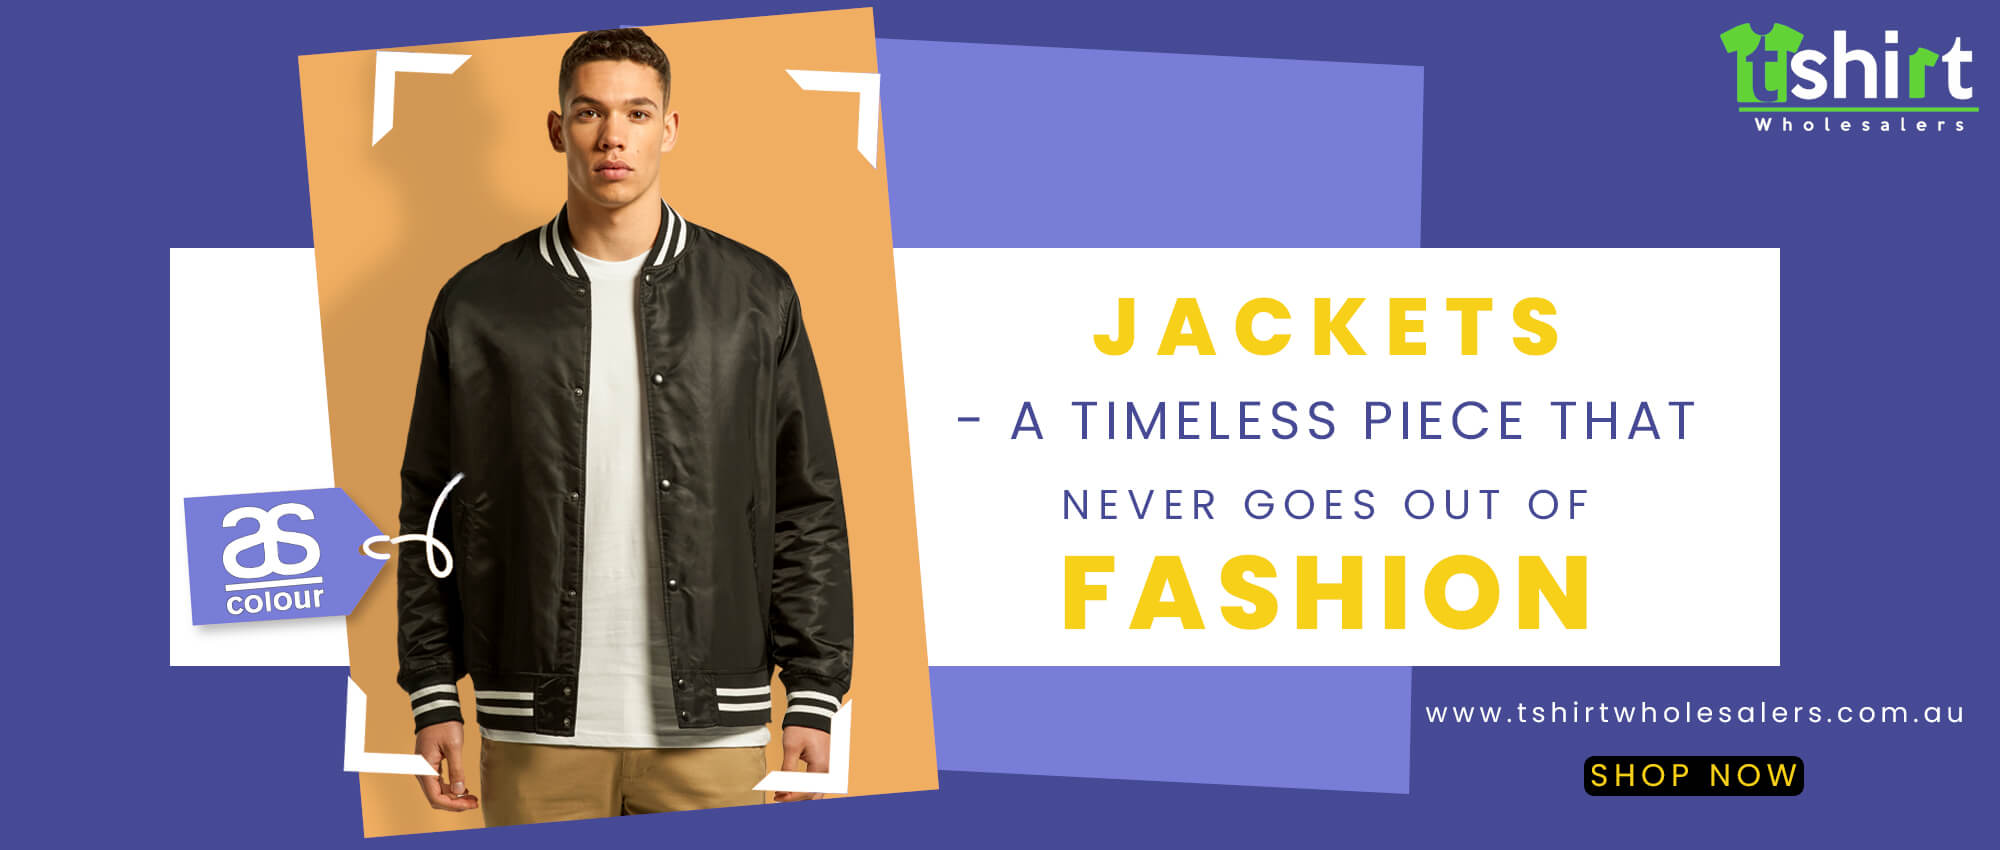 JACKETS - A TIMELESS PIECE THAT NEVER GOES OUT OF FASHION